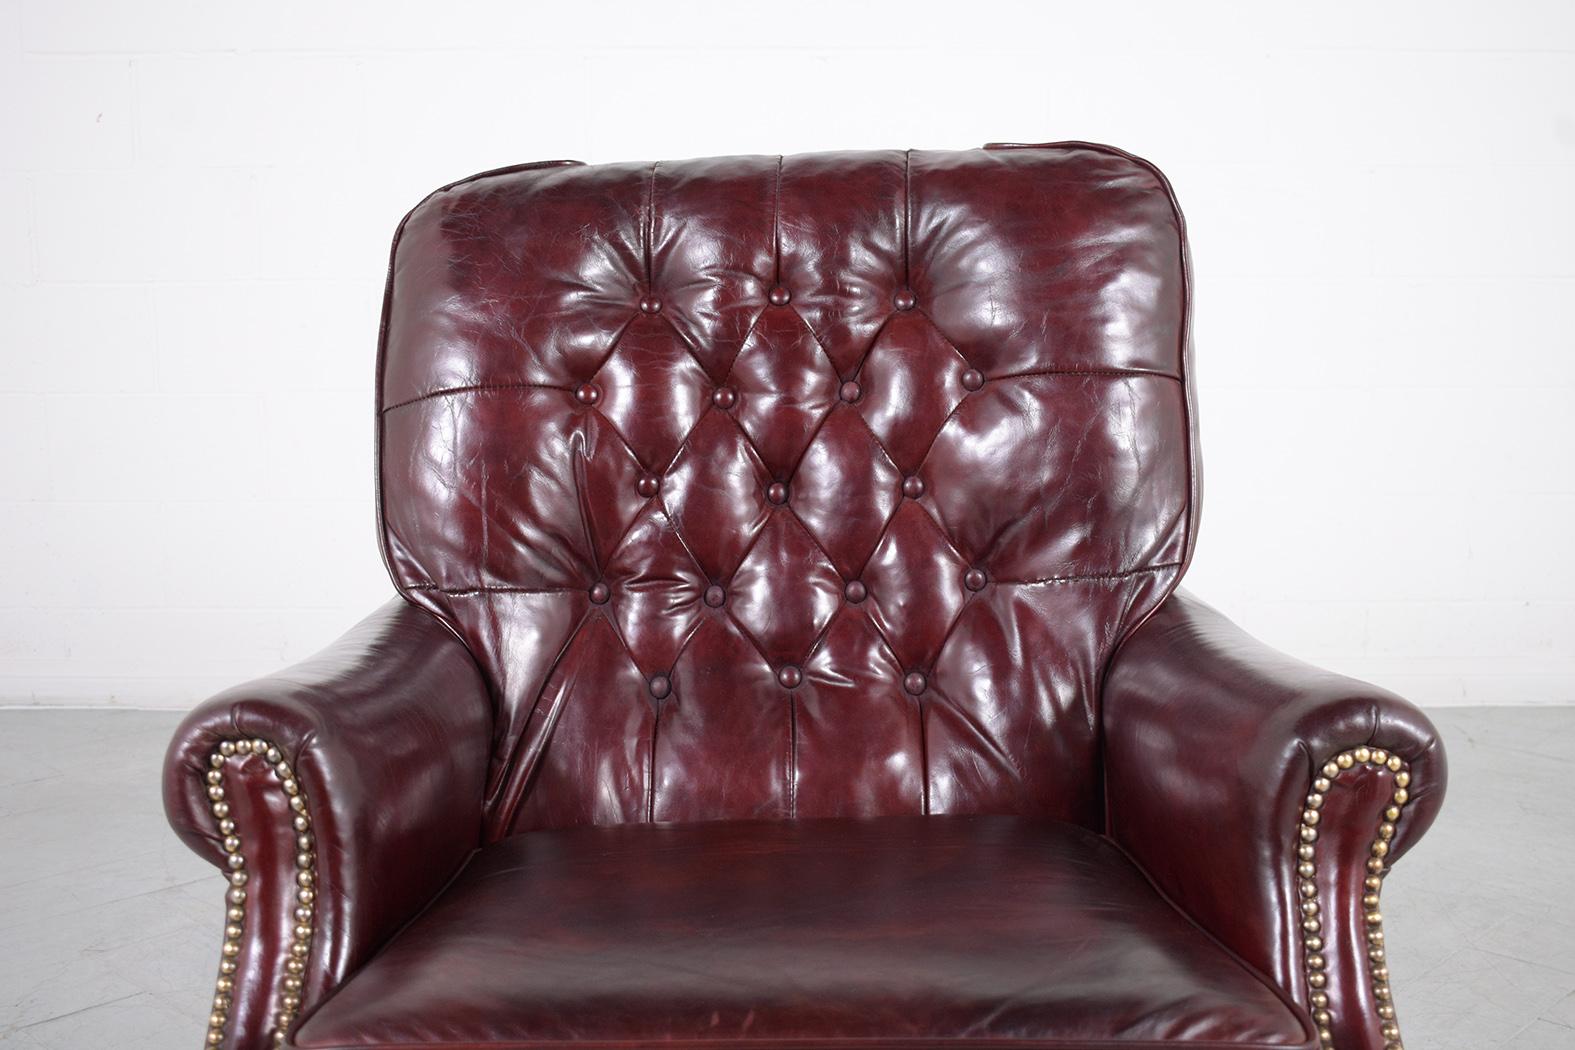 Lacquer Antique English Chesterfield Lounge Chair: Cordovan Red Leather Tufted Design For Sale